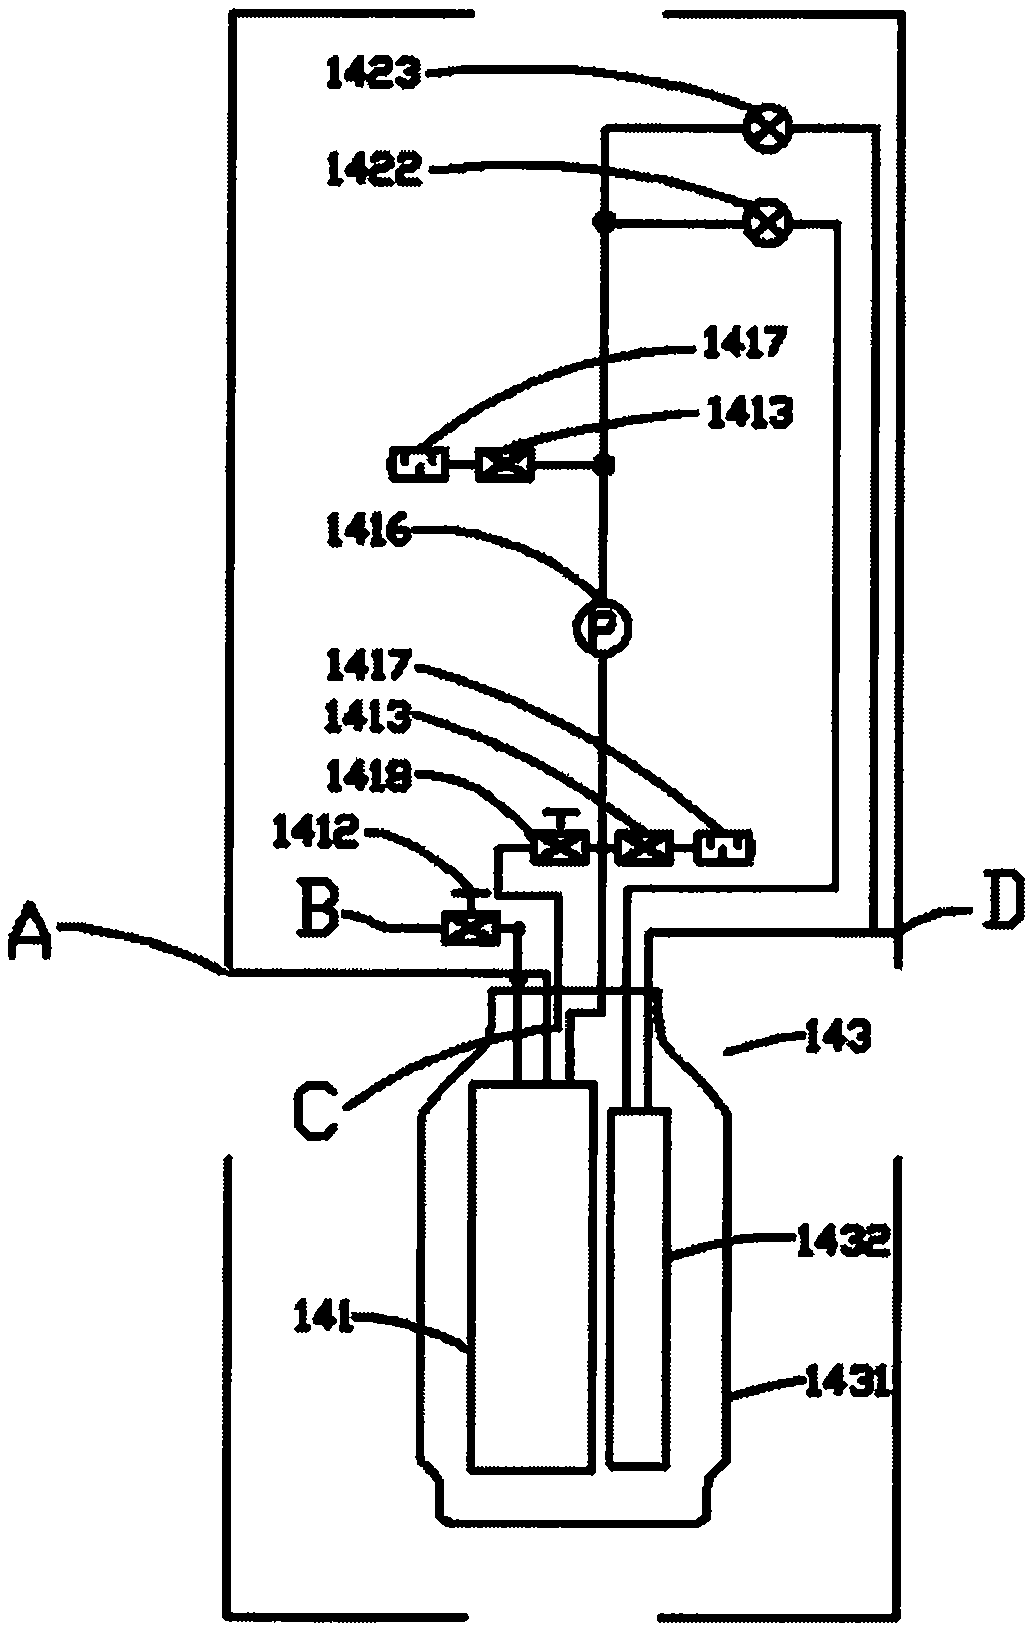 Self-pressurizing cryoablation system controlled by PID